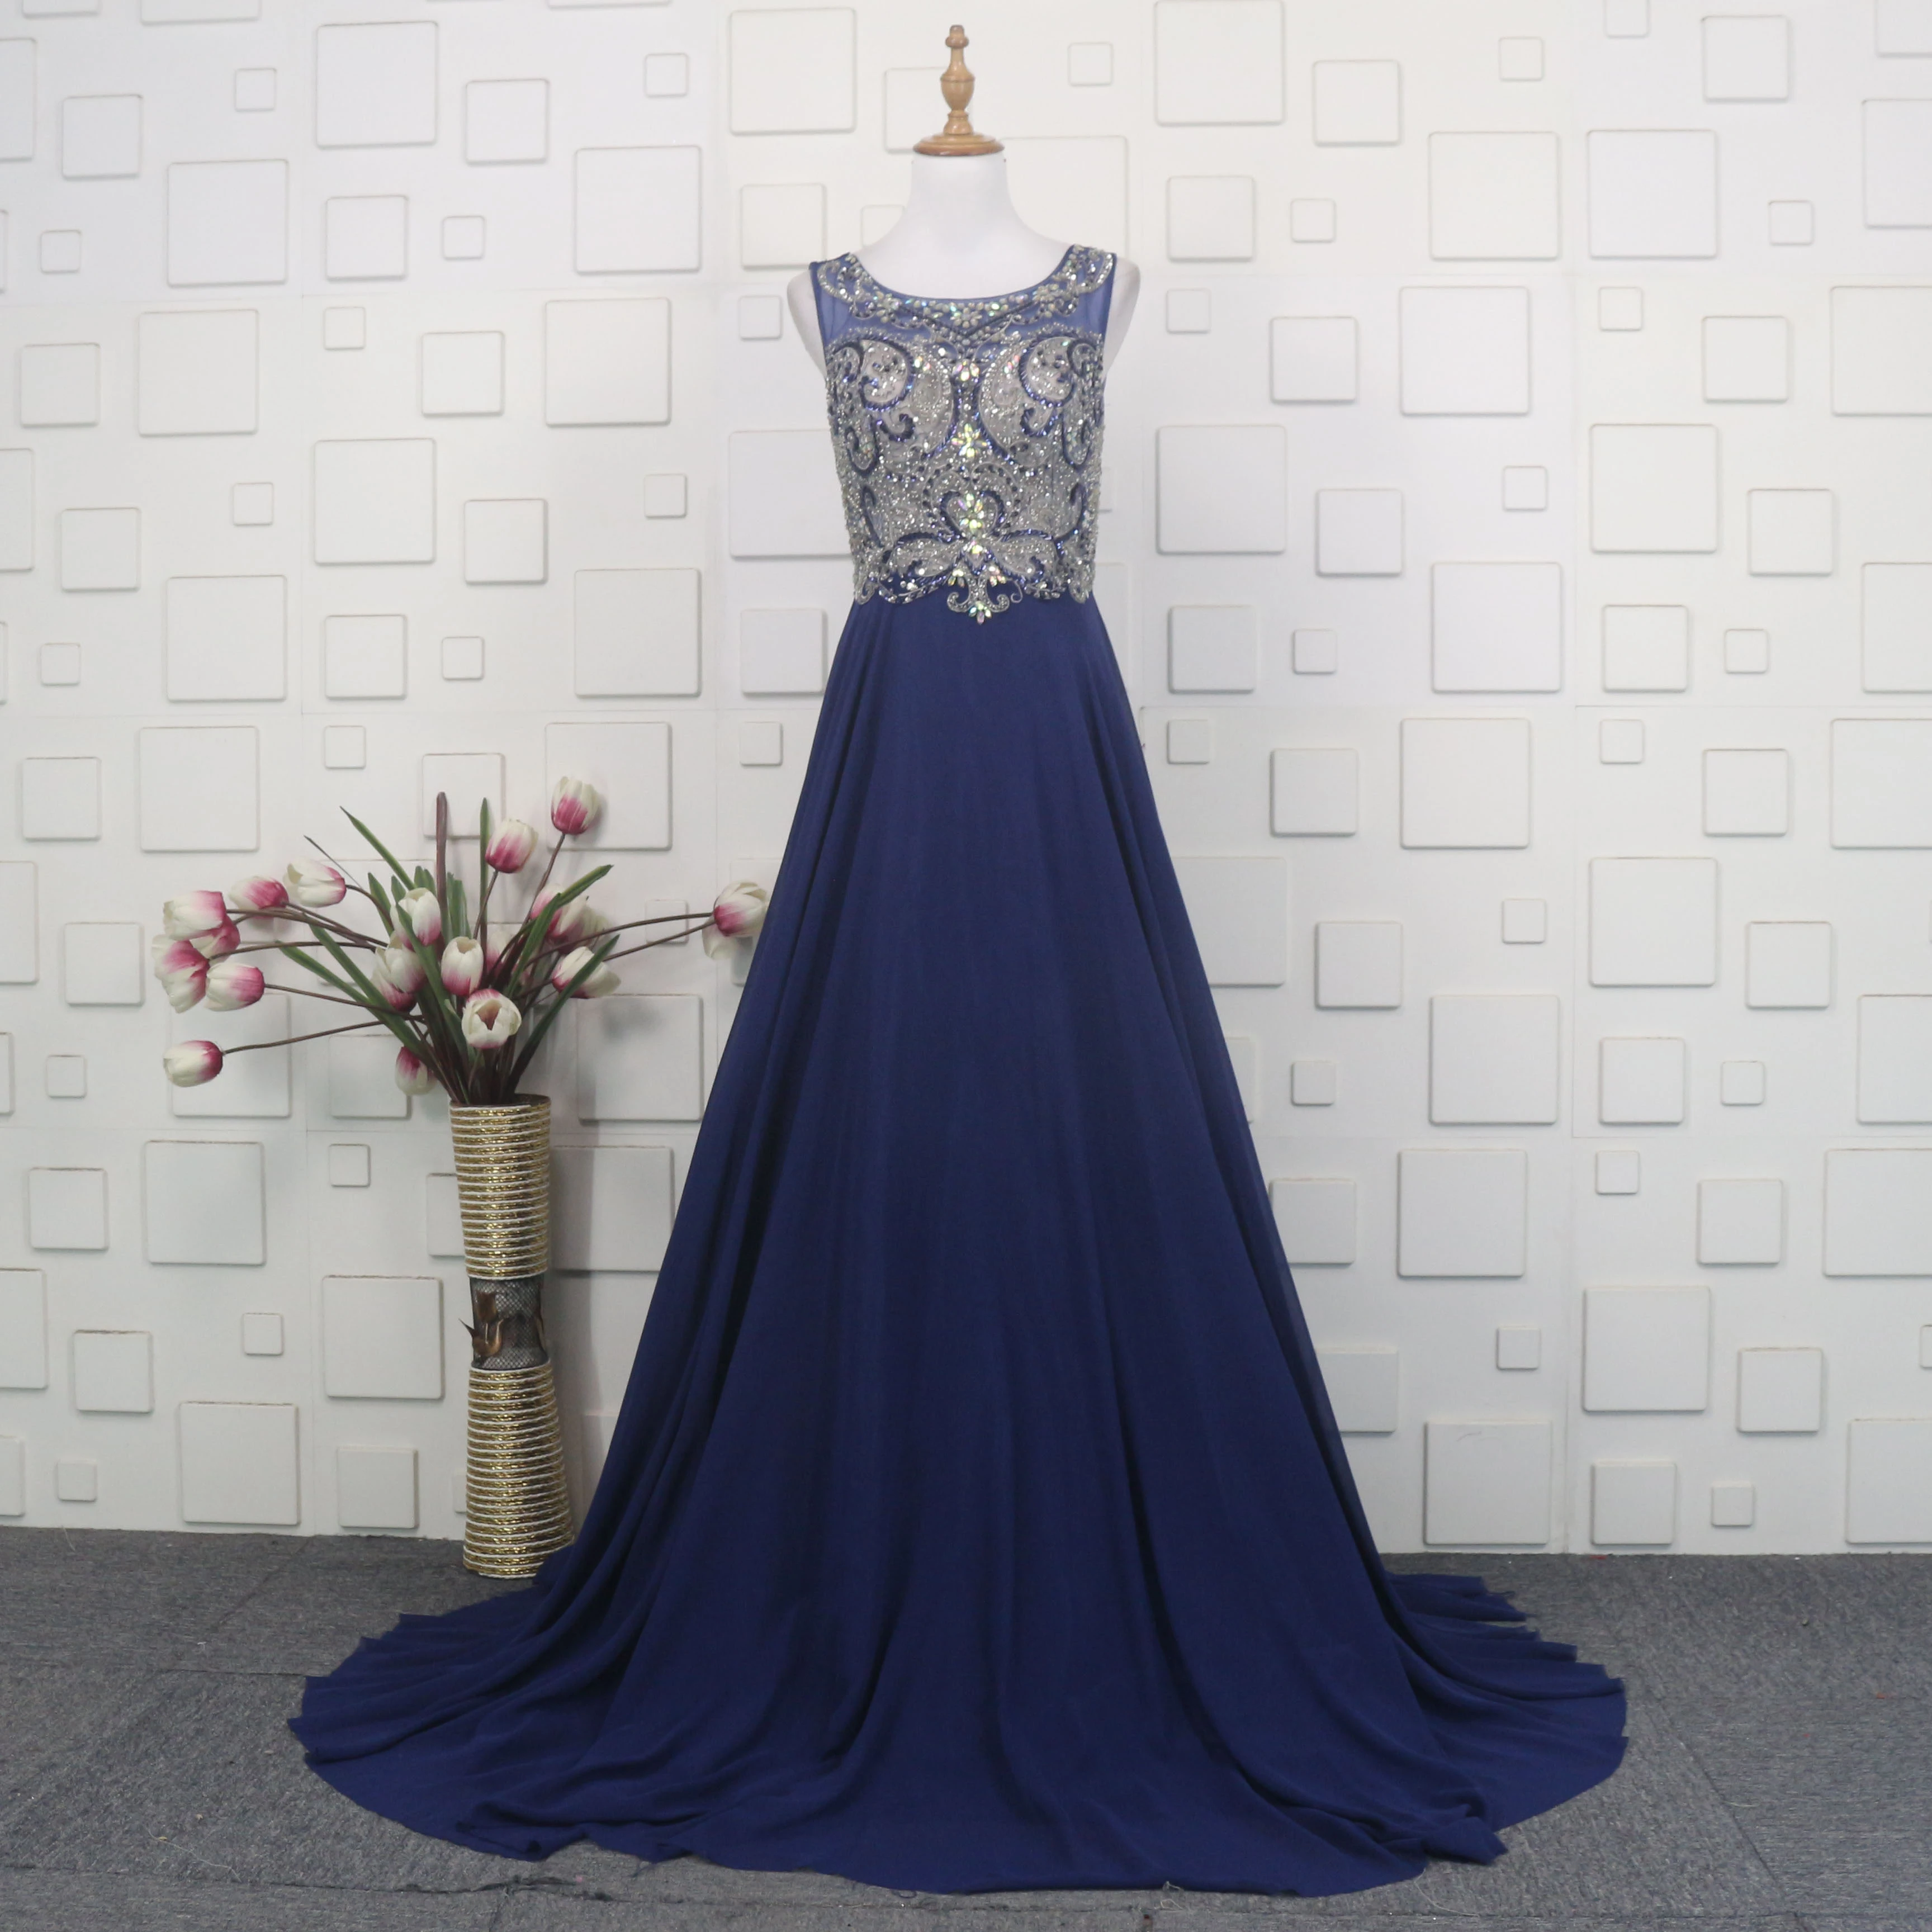 Evening Dresses Navy Evening Dresses A Line 2021 Crystal Beads Sleevless Scoop Floor Length Evening Gowns for Women long gown